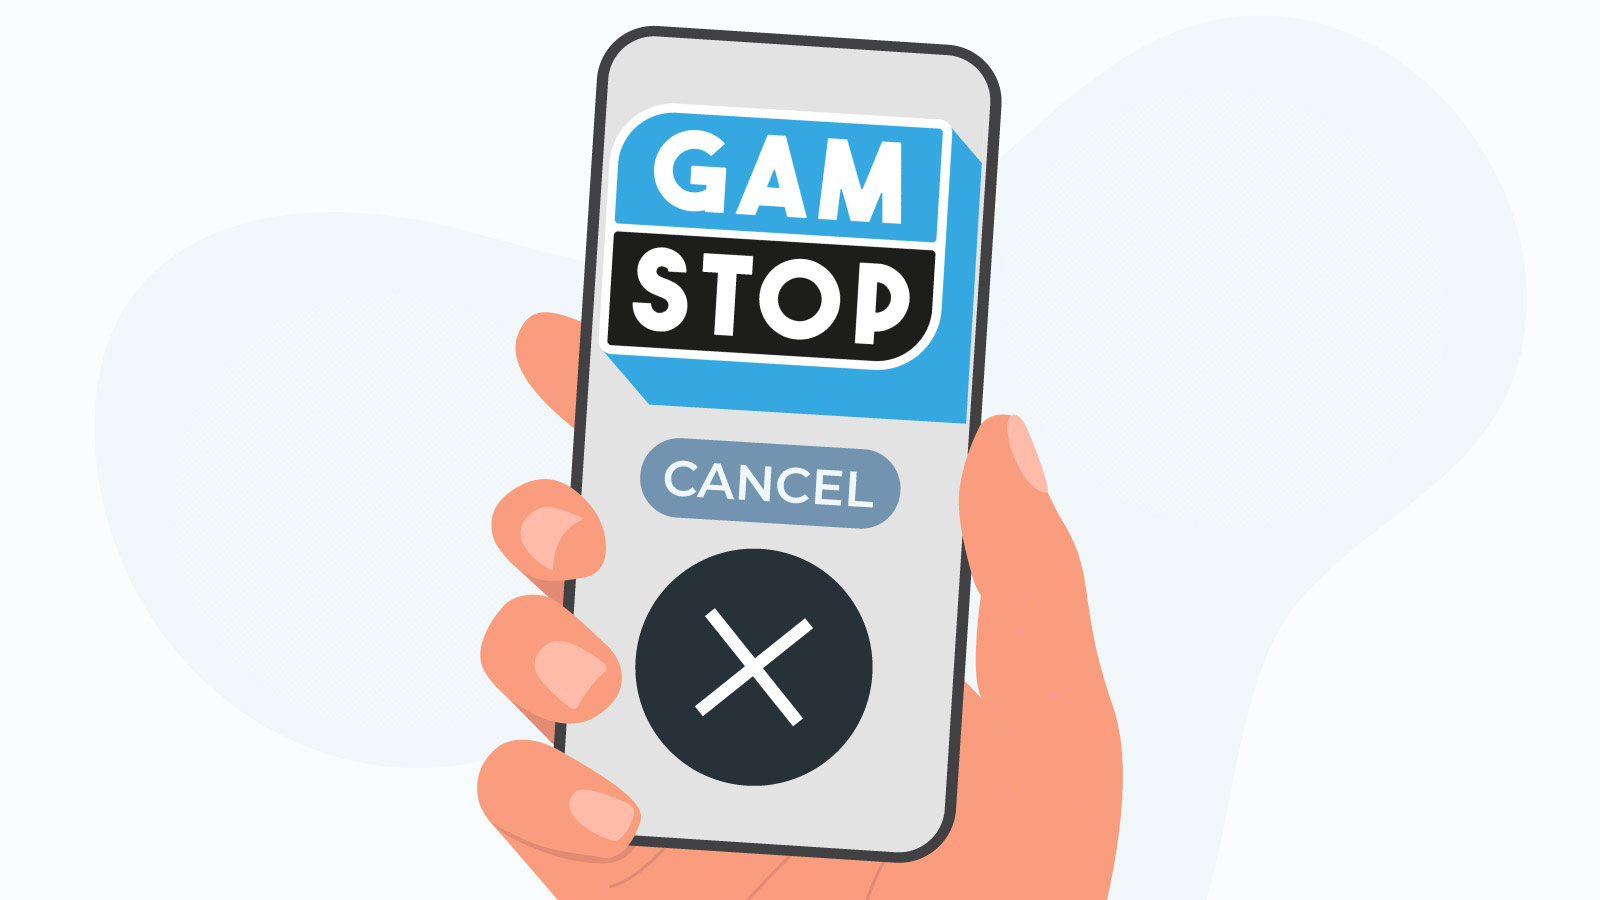 Can You Cancel GAMSTOP Self-Exclusions